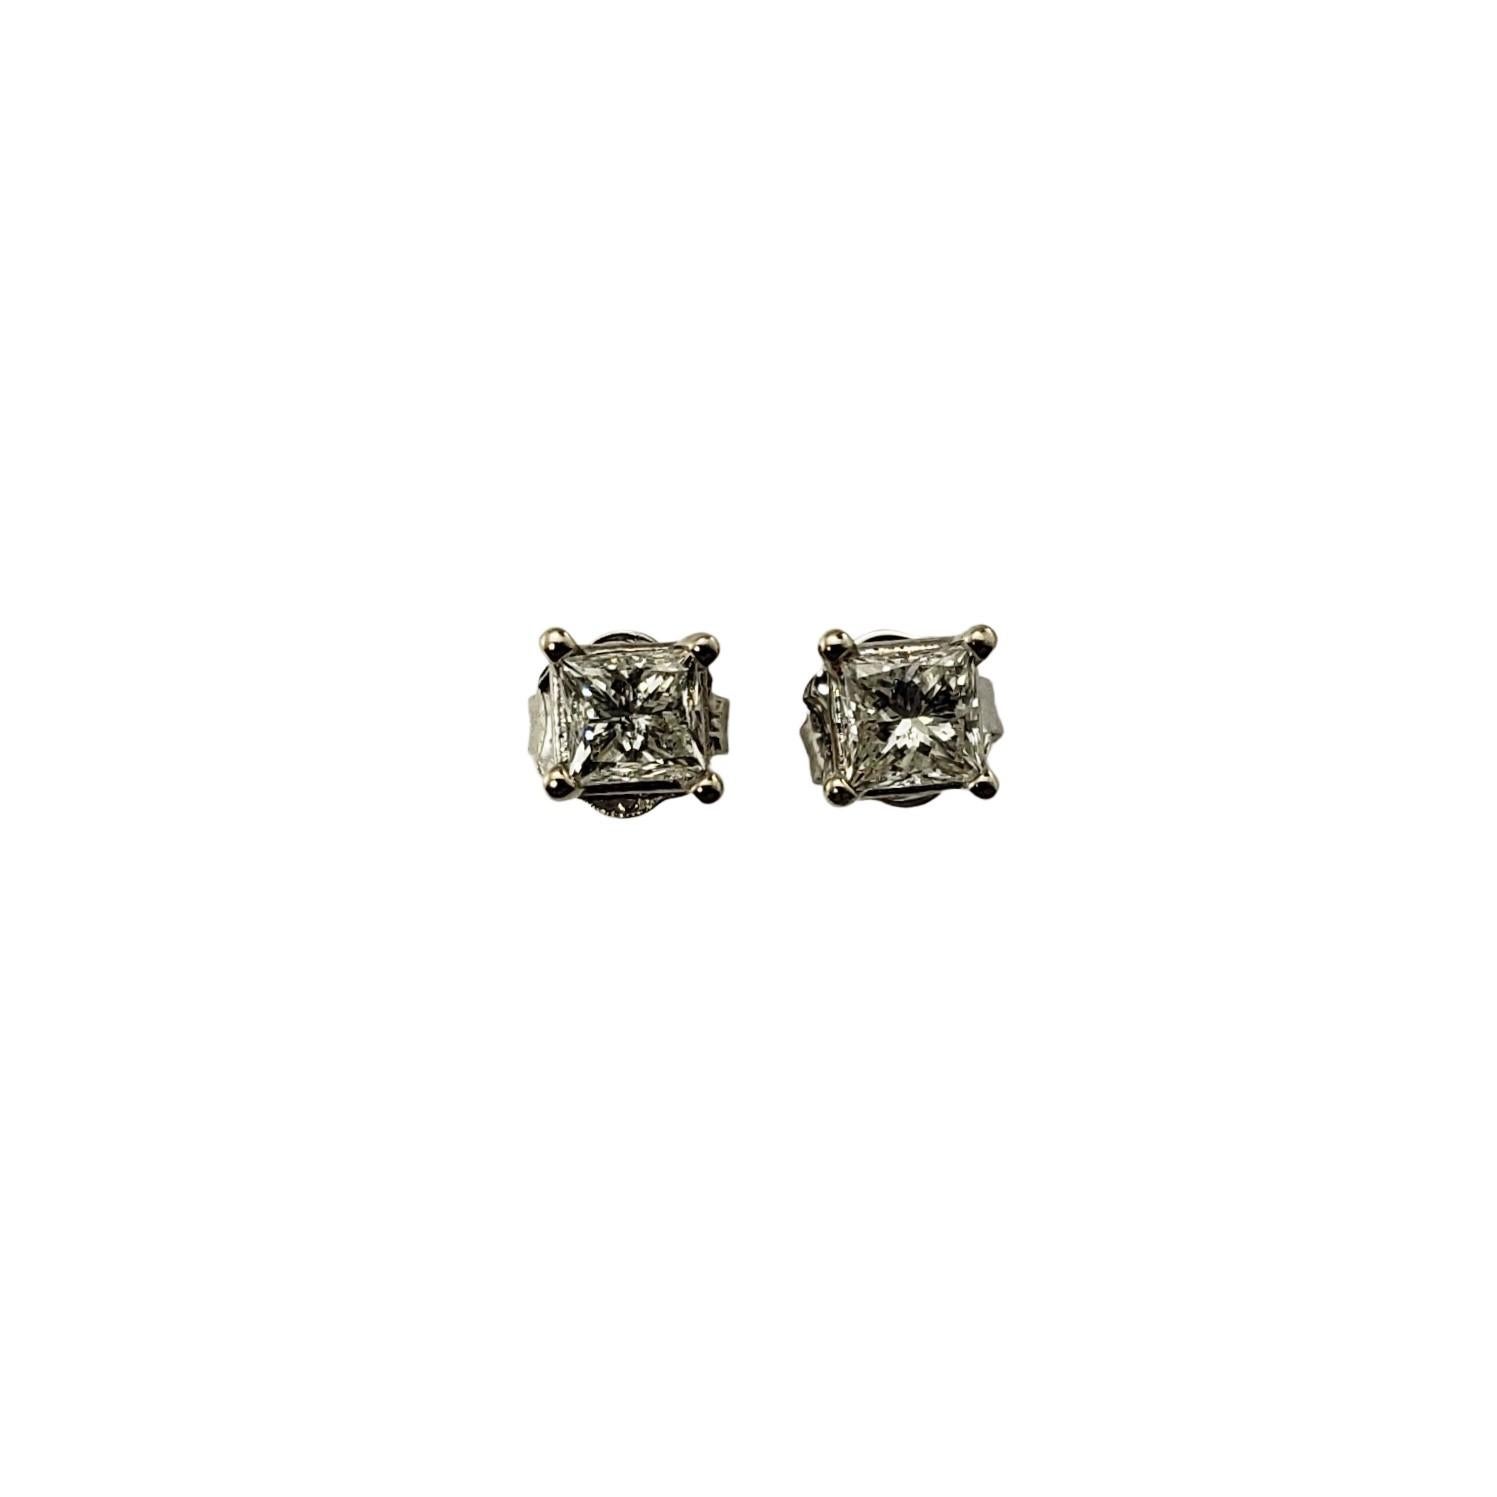 Vintage 14 Karat White Gold Princess Cut Diamond Earrings-

These sparkling earrings each feature one princess cut diamonds set in classic 14K white gold.  Push back closures.  

Approximate total diamond weight:   .51 ct.

Diamond color: